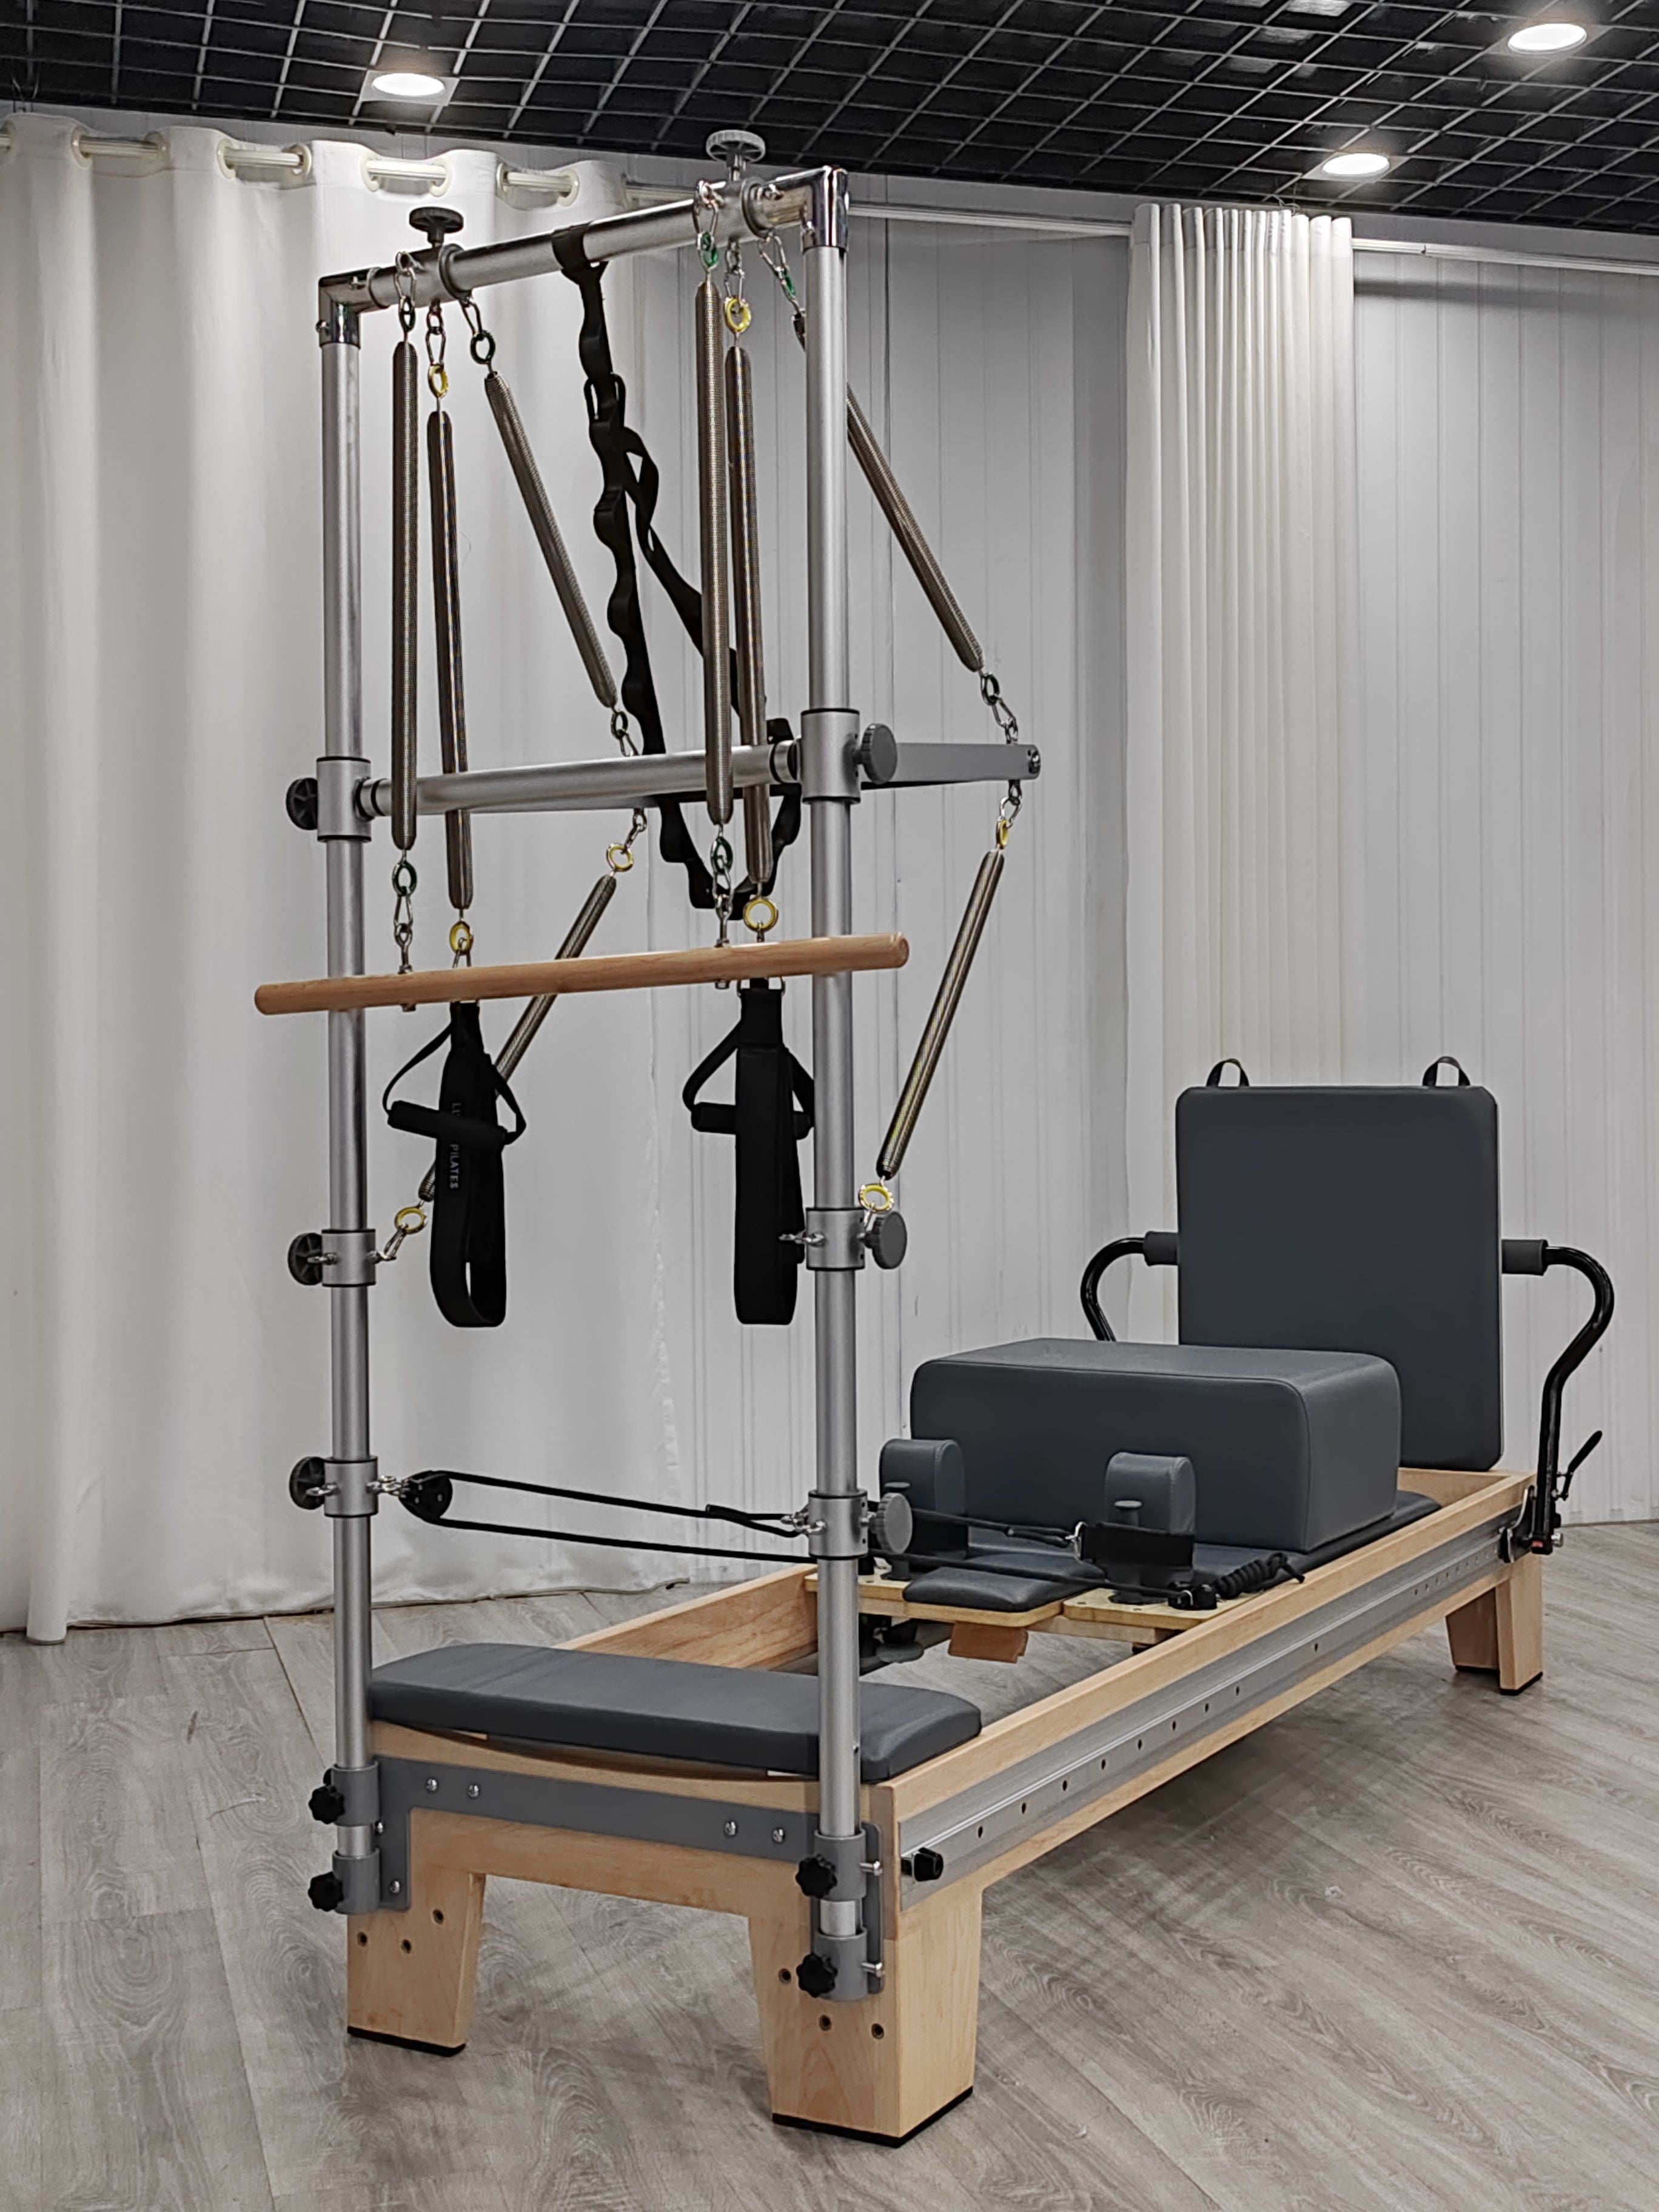 Pilates Tower vs Reformer: The Performance Difference